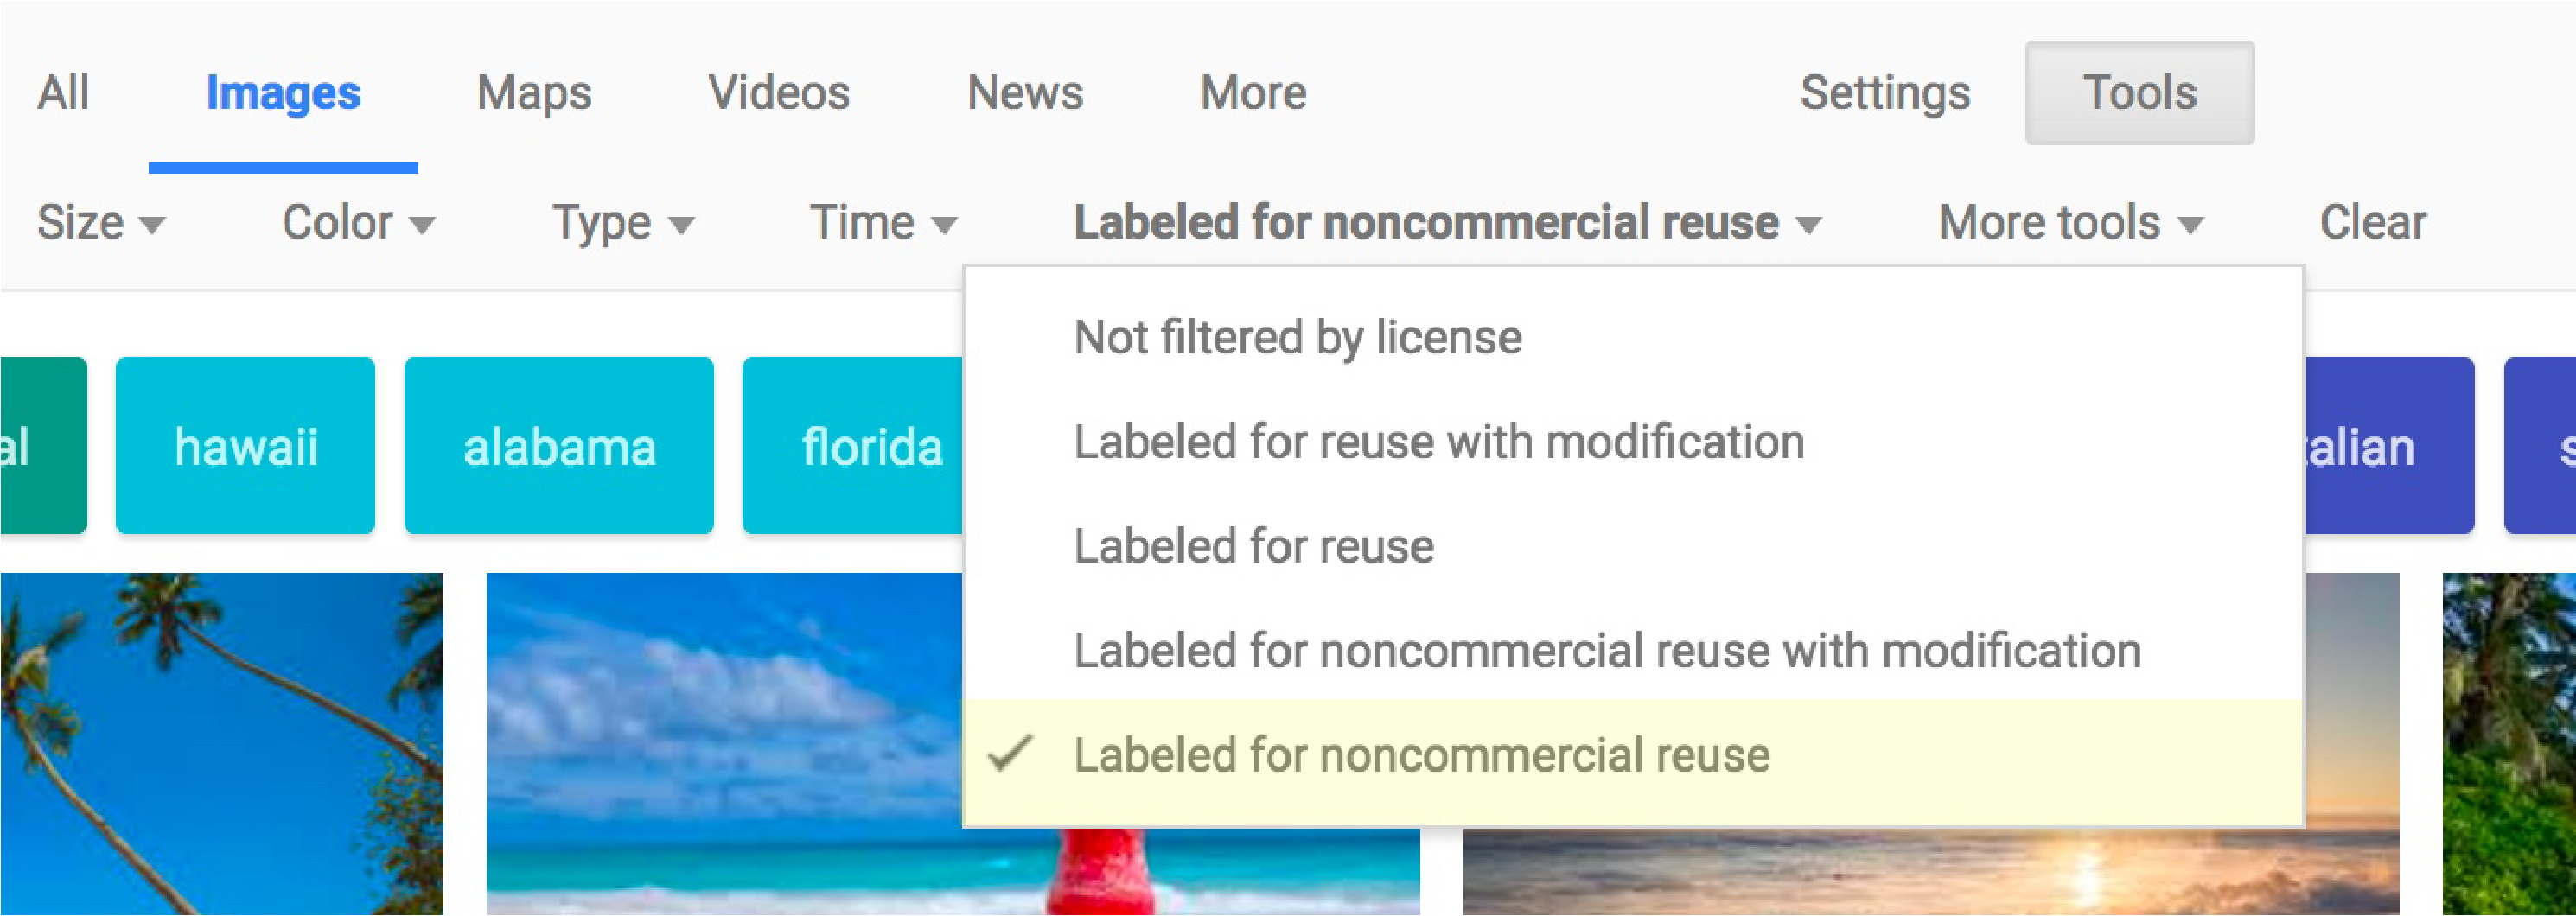 When searching images with Google, make sure to select labeled for non-commercial reuse.